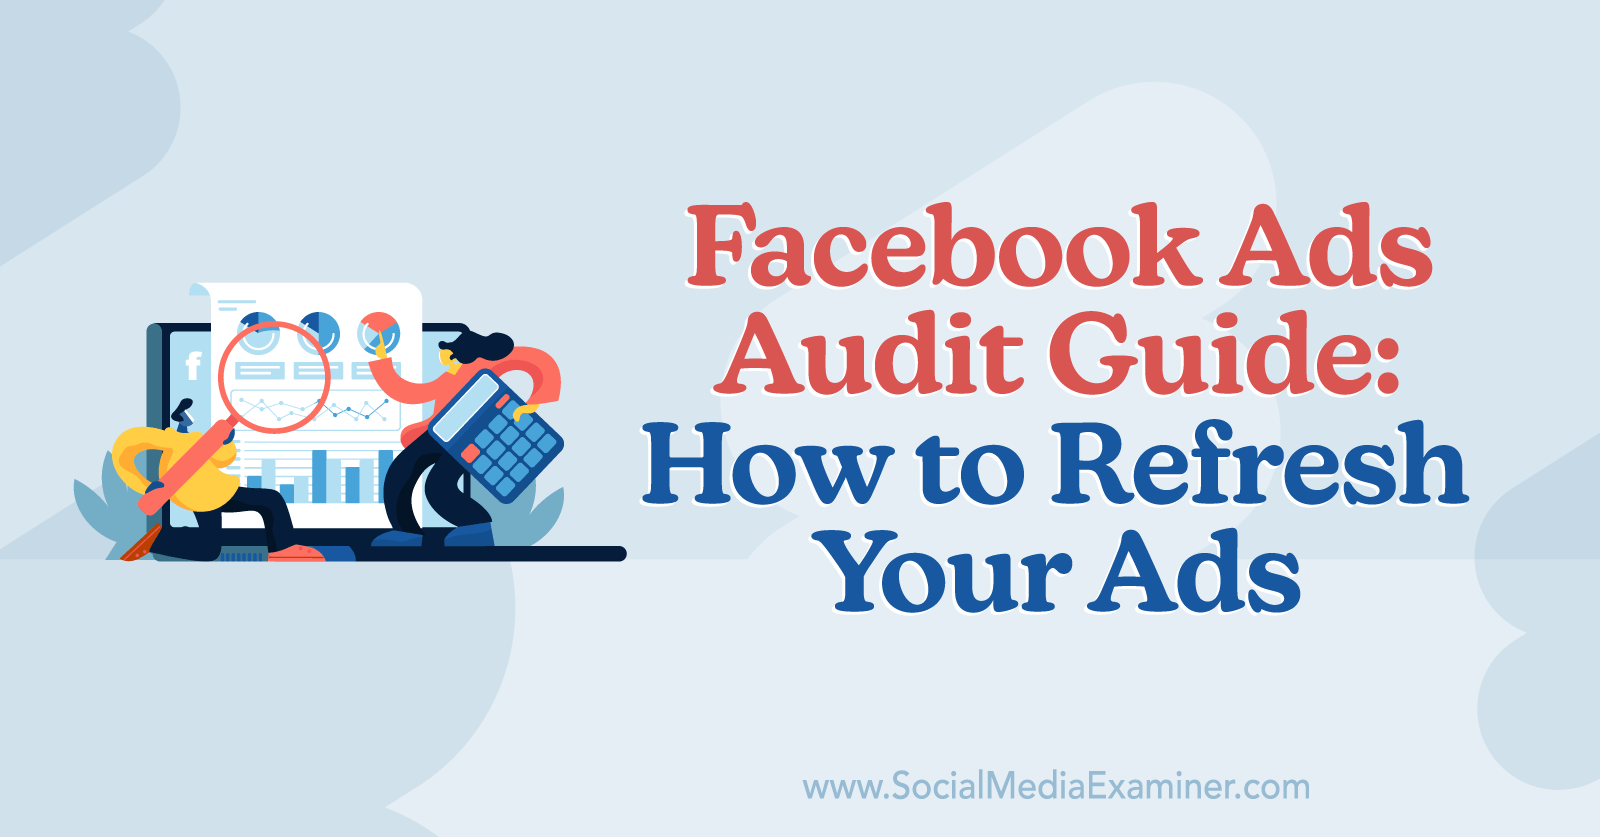 Facebook Ads Audit Guide: How to Refresh Your Ads by Anna Sonnenberg on Social Media Examiner.